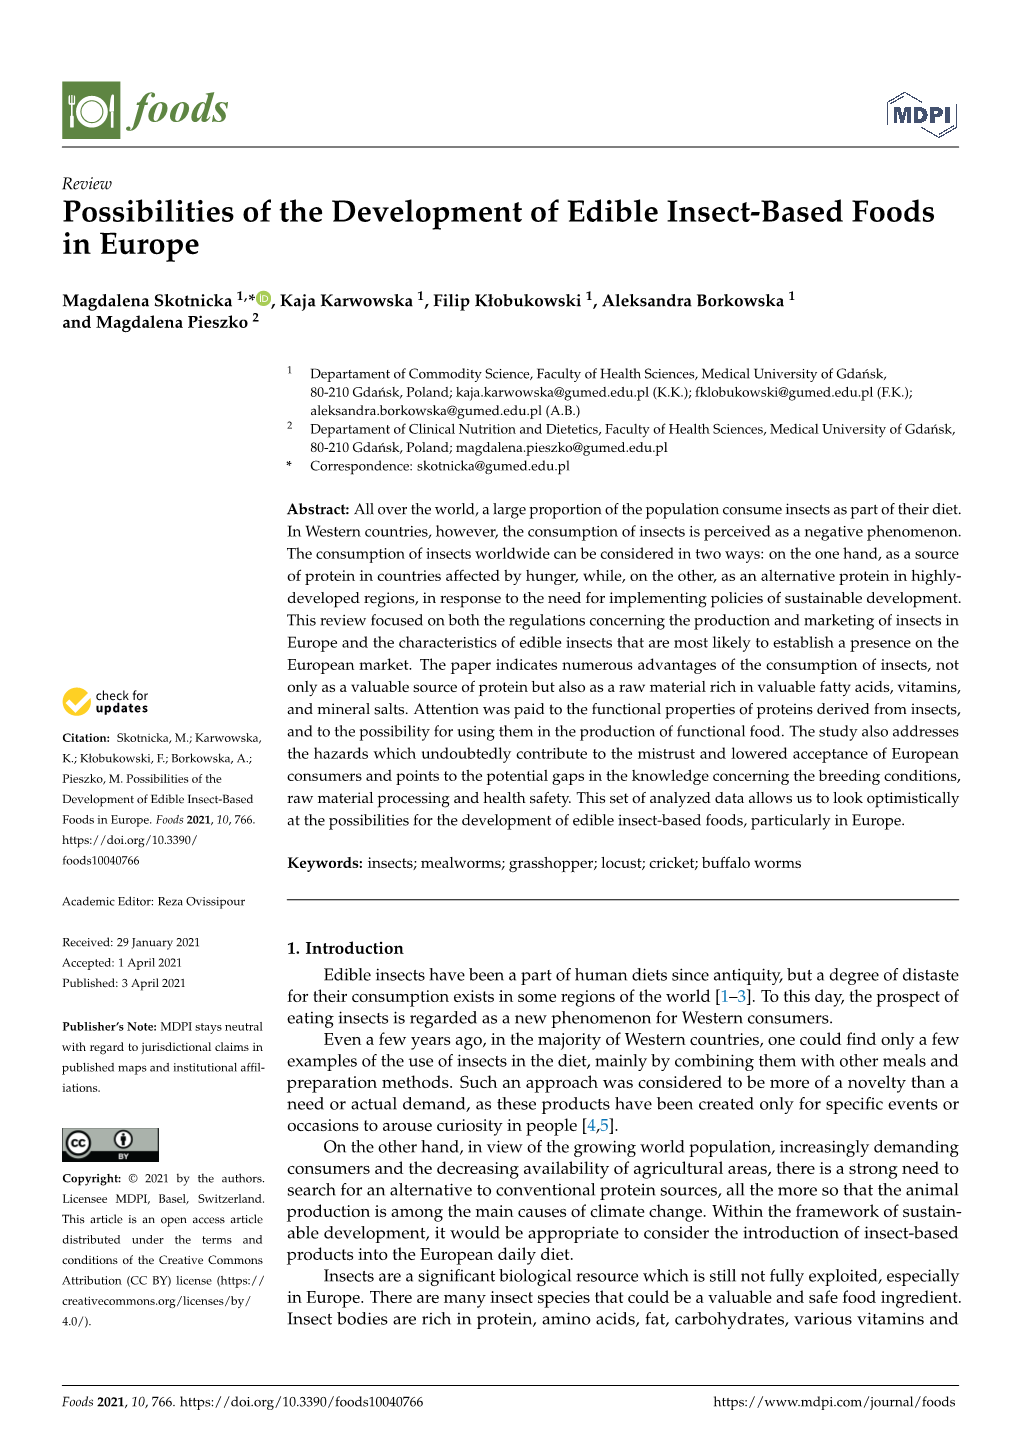 Possibilities of the Development of Edible Insect-Based Foods in Europe